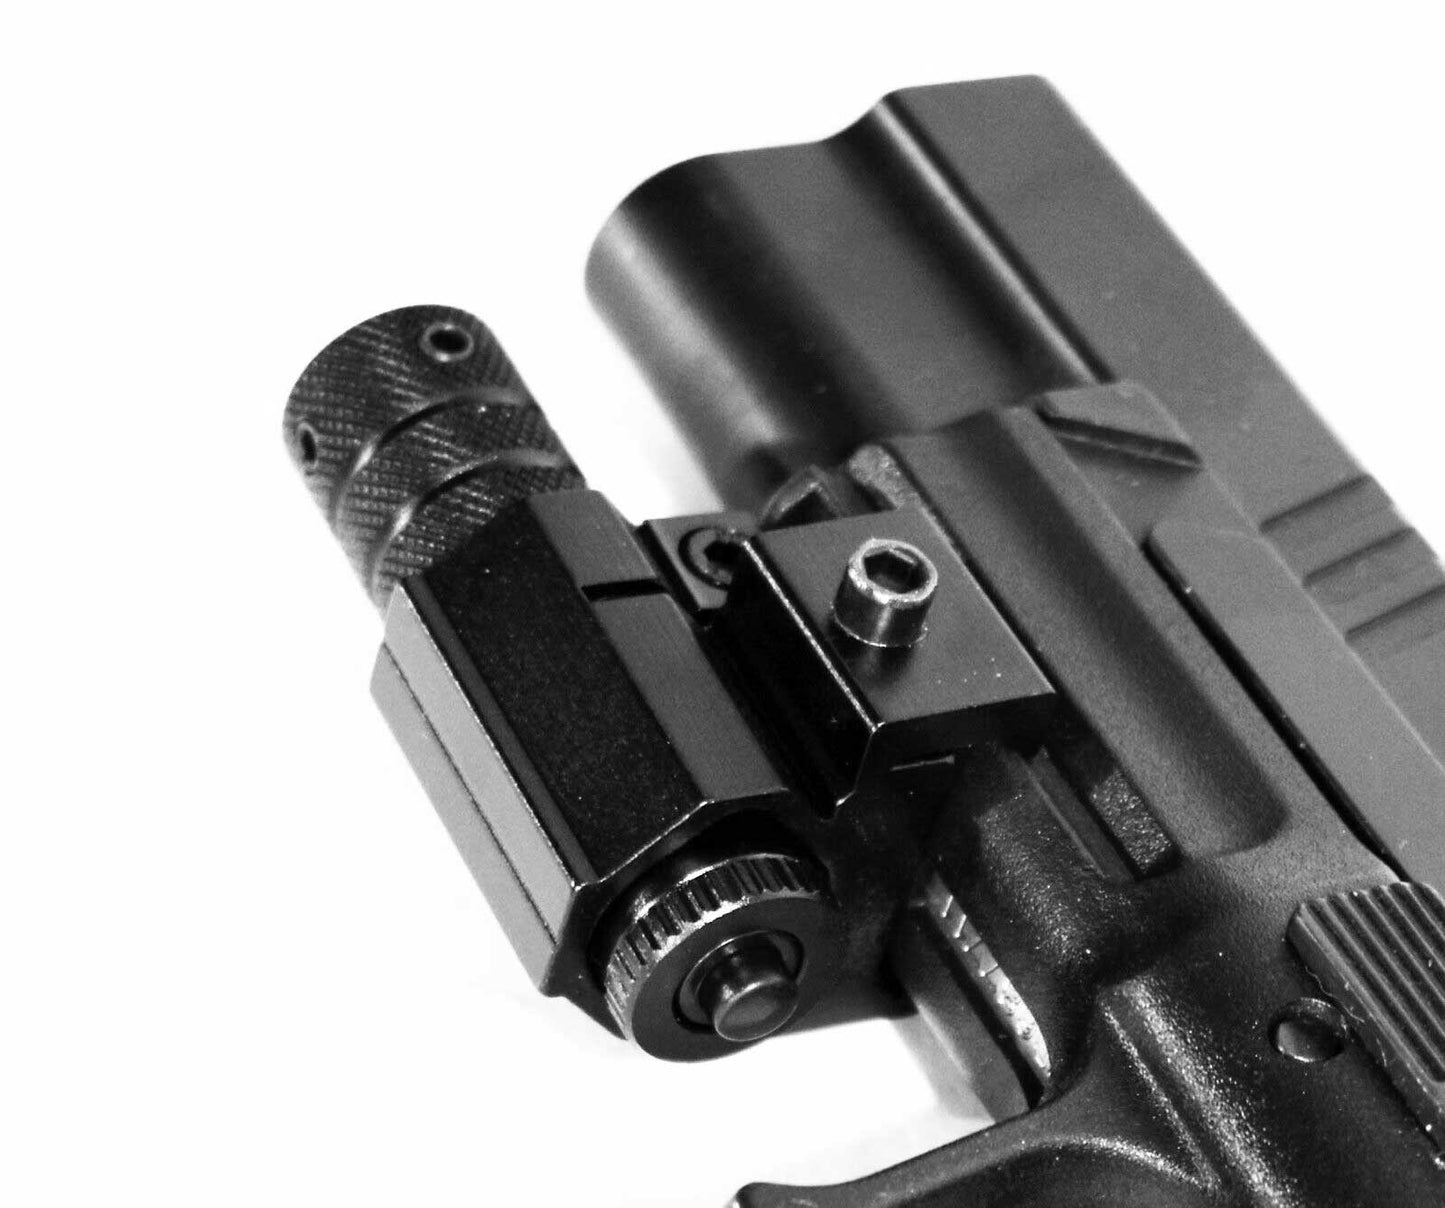 Trinity red dot laser sight compatible with Smith and Wesson M&P M2.0 handgun.